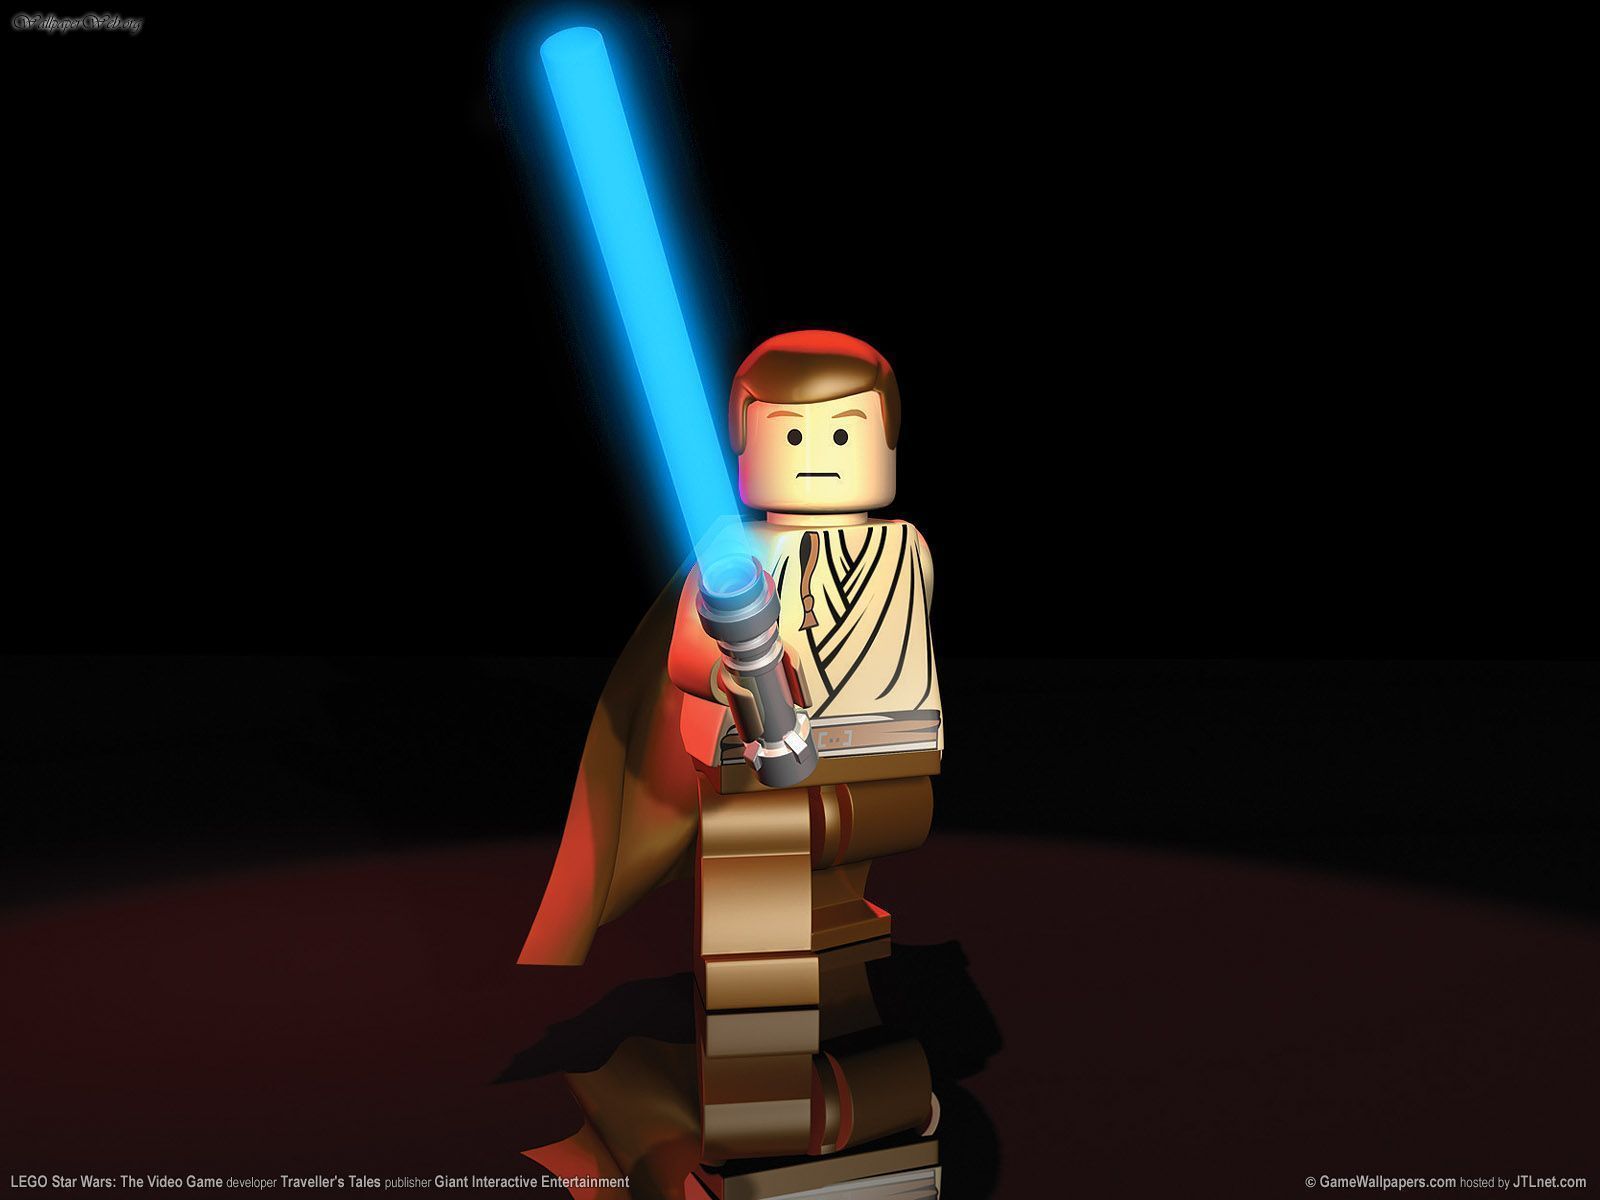 Games: Lego Star Wars The Video Game, picture nr. 29890